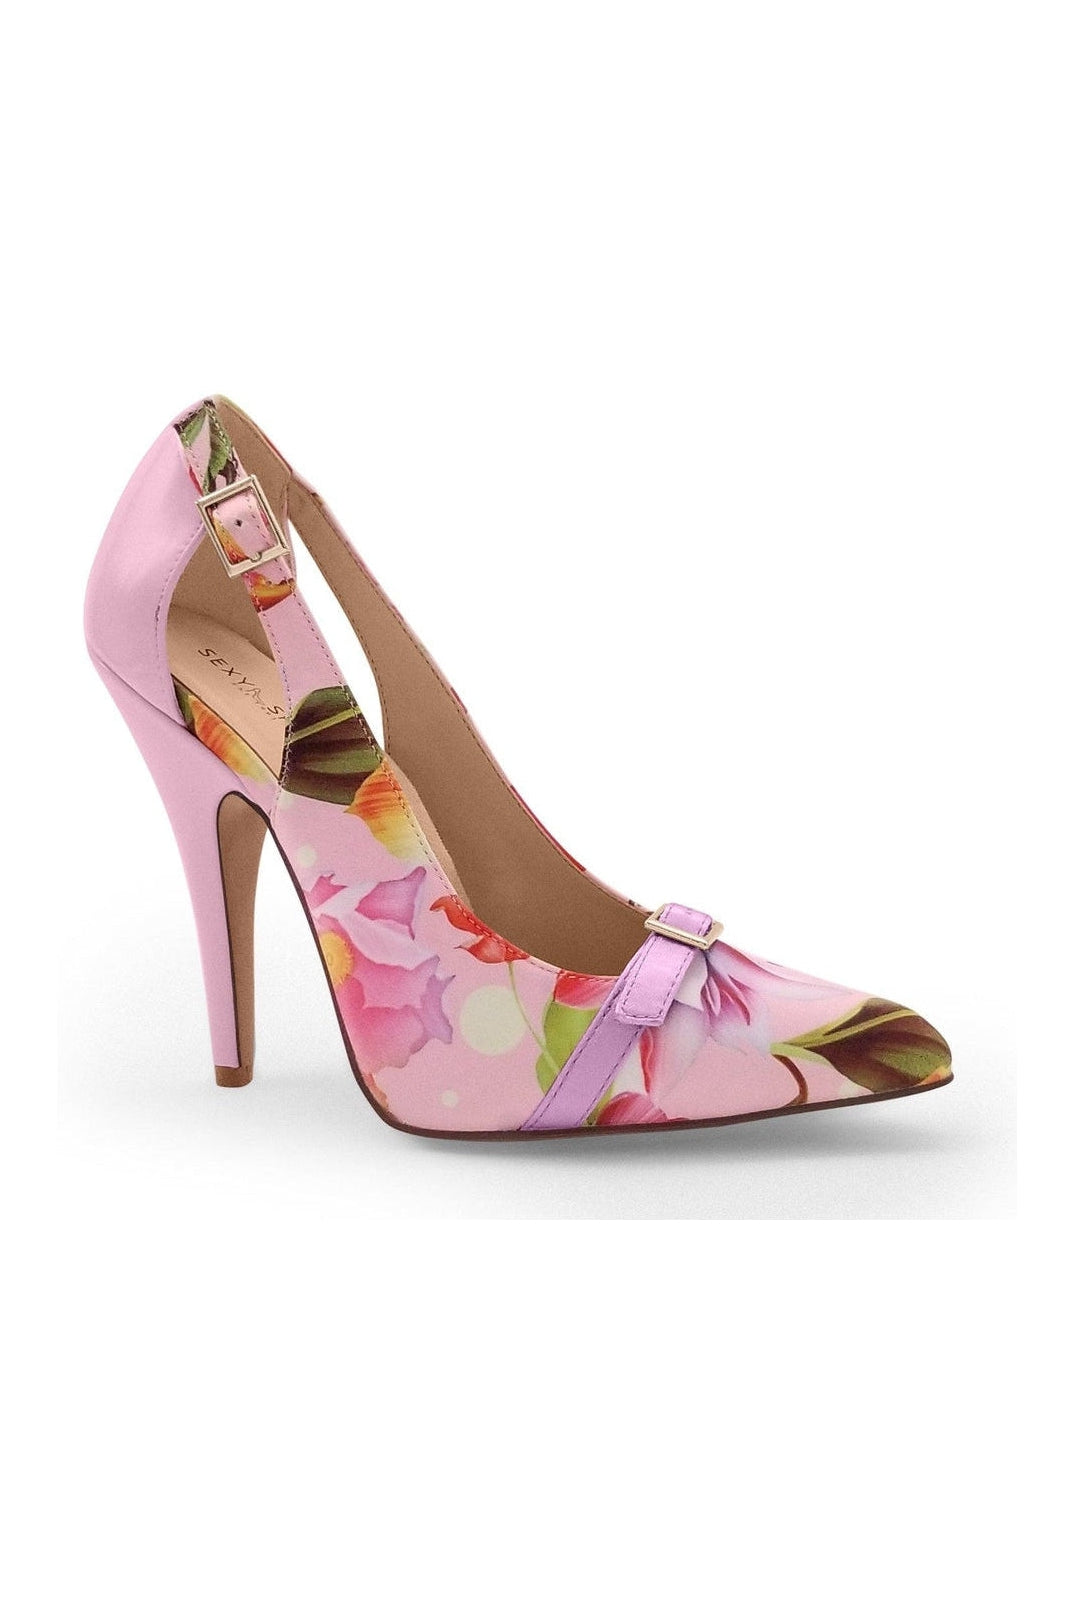 Flirty Floral Print Pump with Buckle Detail-Pumps-Sexyshoes Signature-Pink-SEXYSHOES.COM